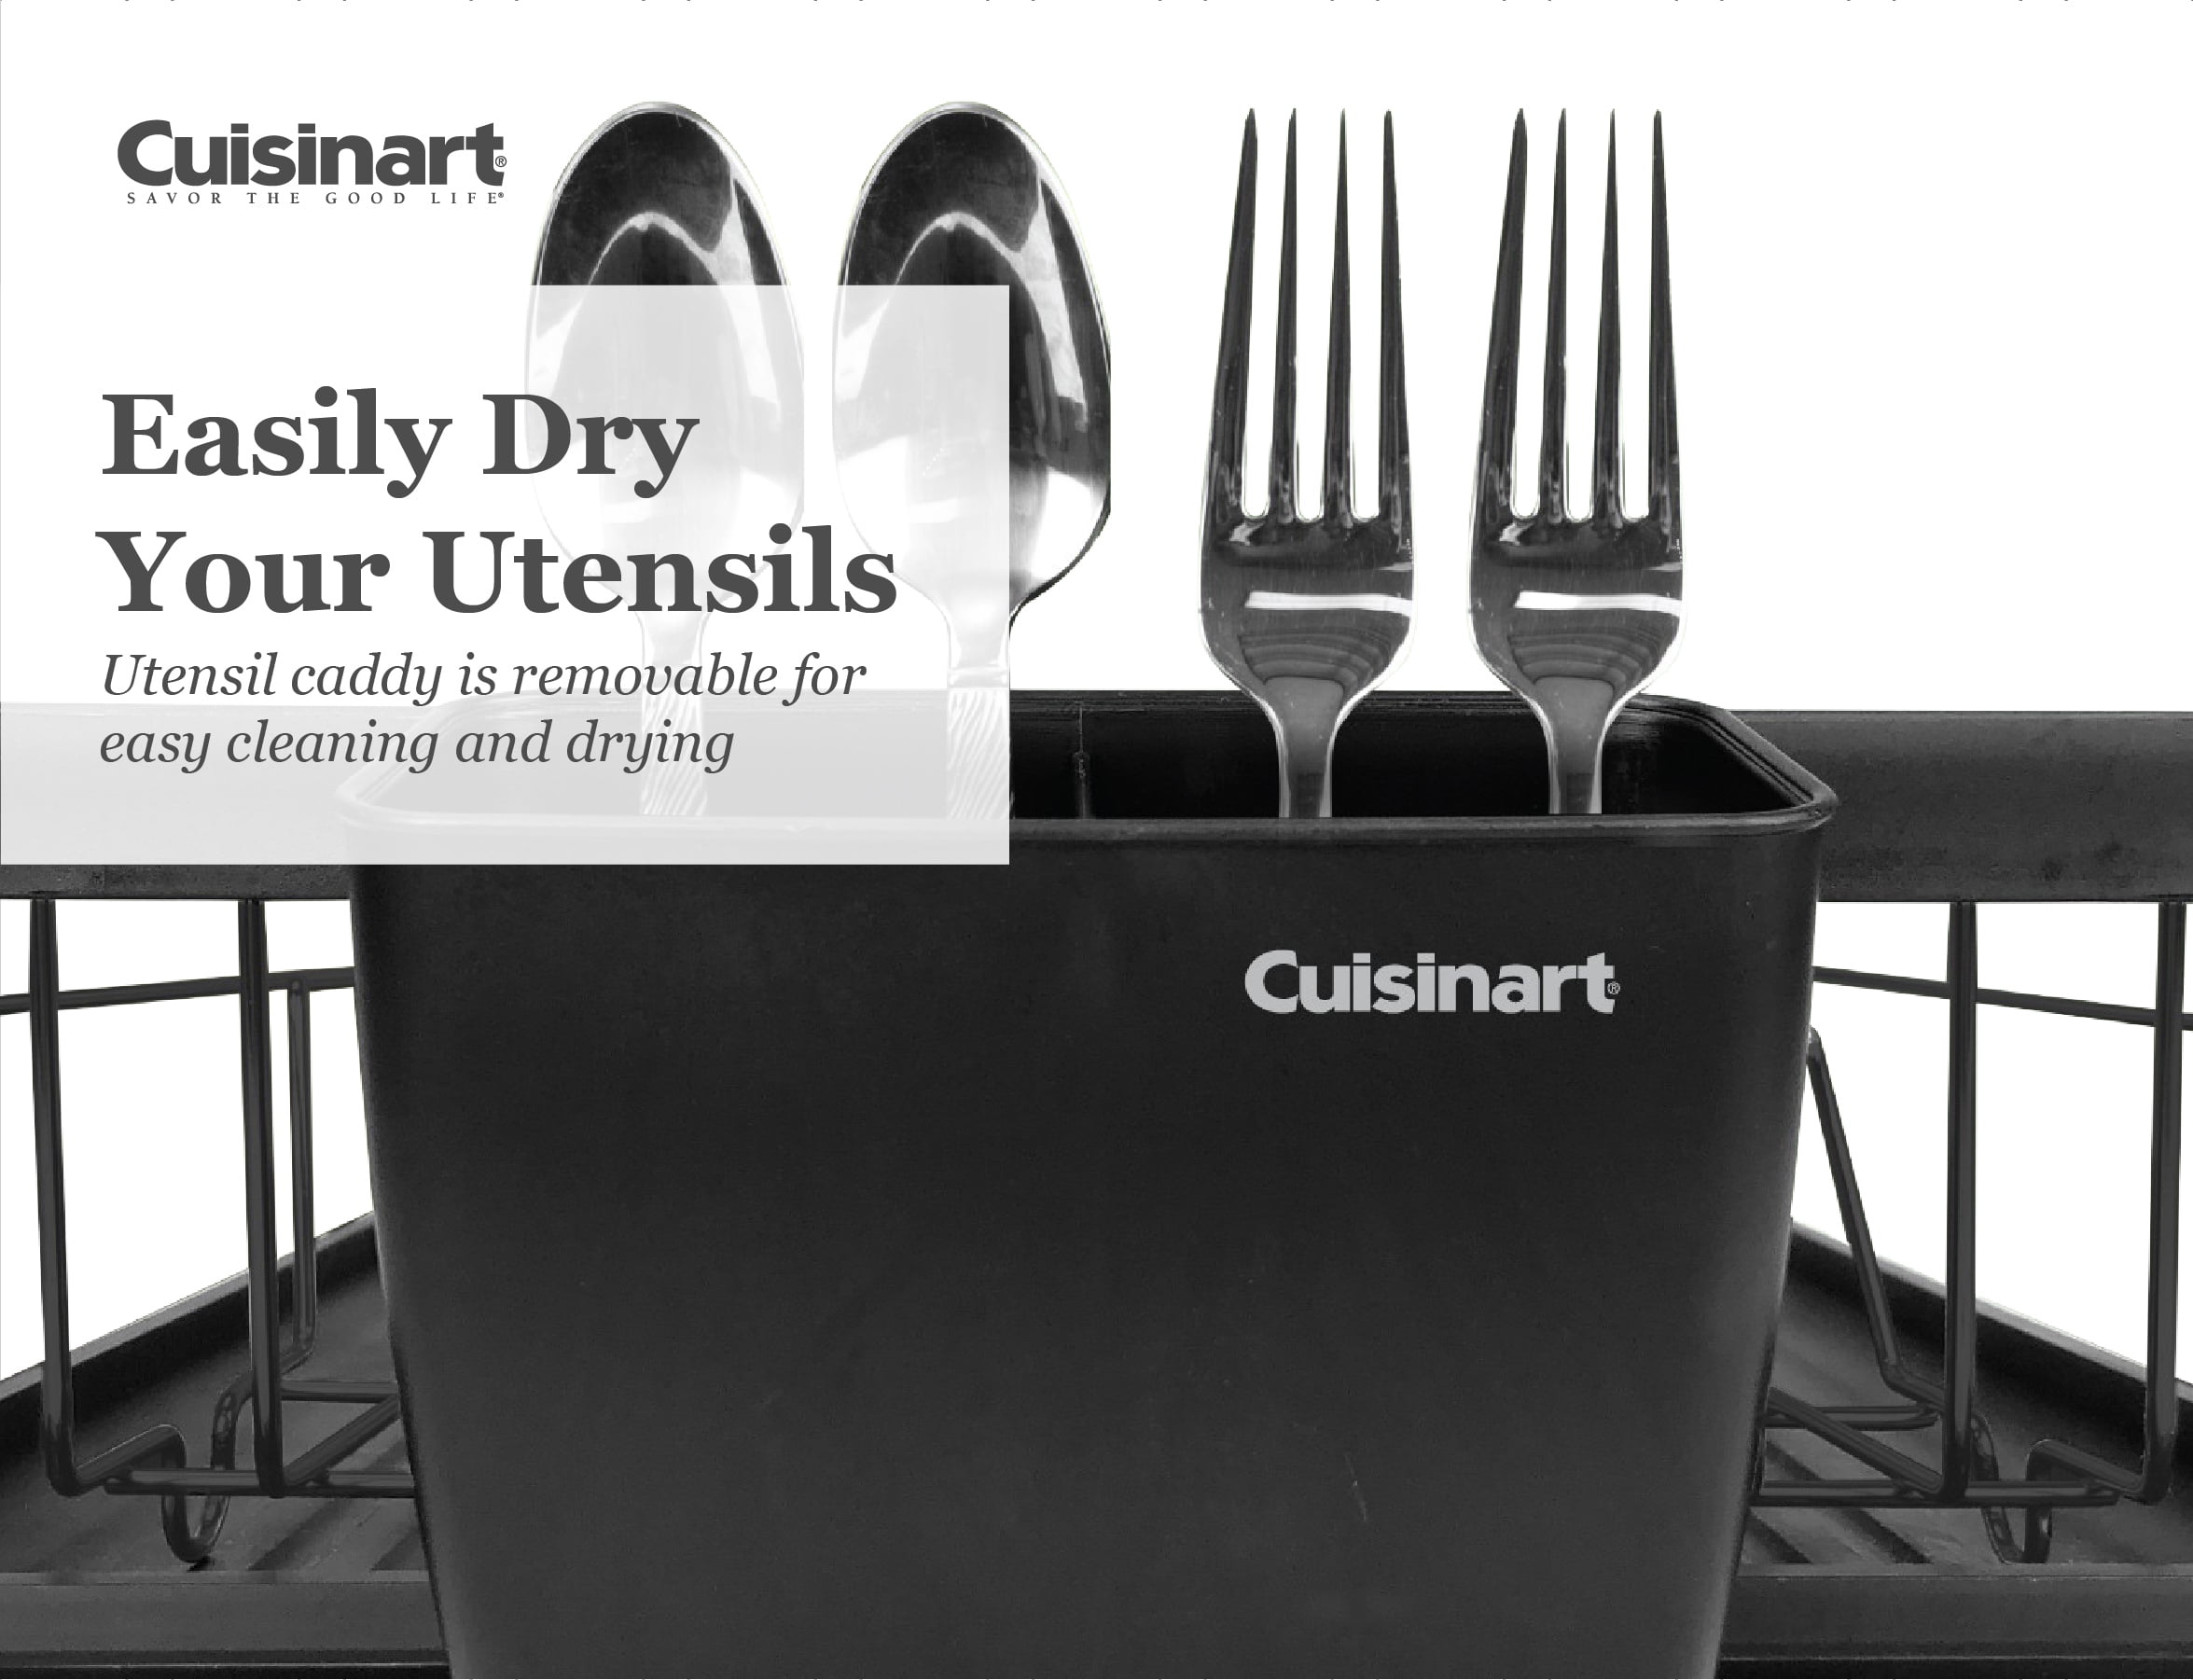 Cuisinart Aluminum Rust Proof Dish Drying Rack - Compact Dish Drying Rack  with a Removable Tray, Swivel Draining Spout, and Utensil Caddy-Perfect  Kitchen Countertop Organizer, Copper, 16 x 12 x 5.5